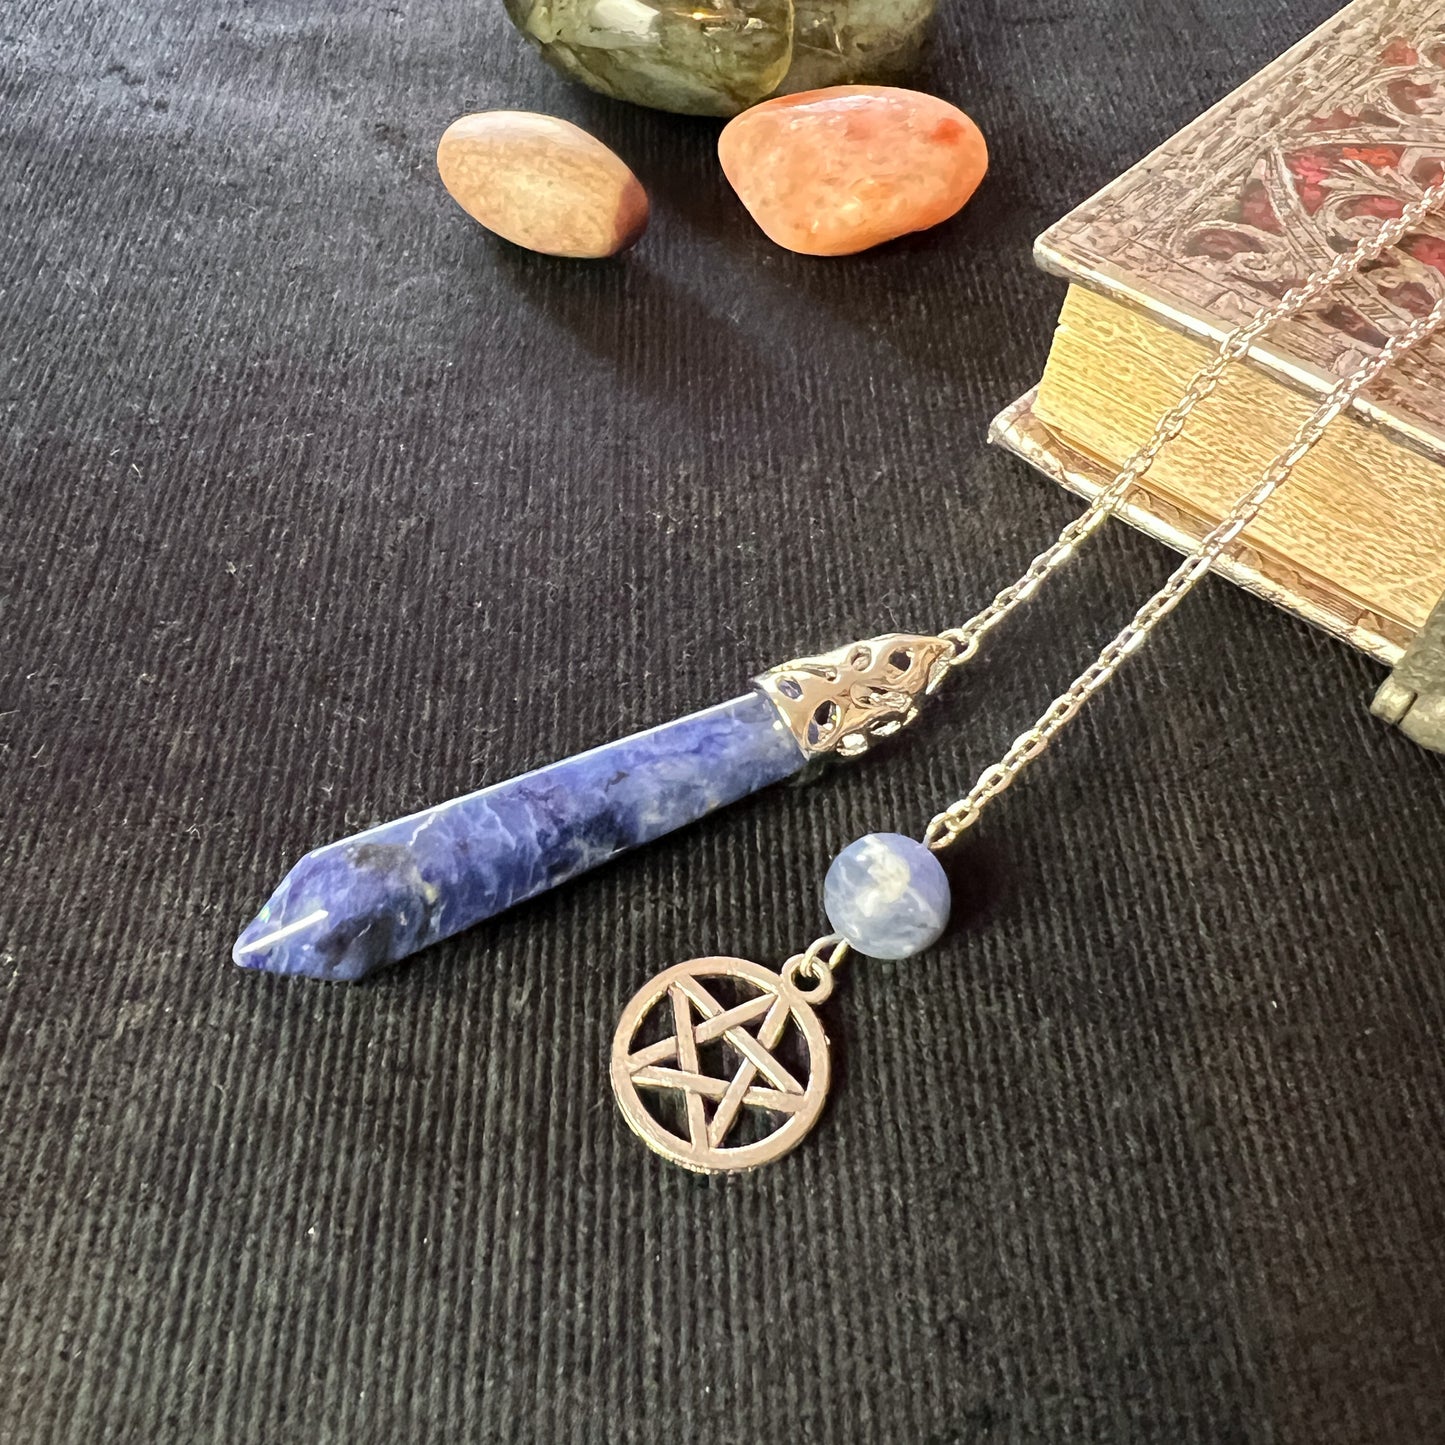 Sodalite and pentacle dowsing pendulum - The French Witch shop